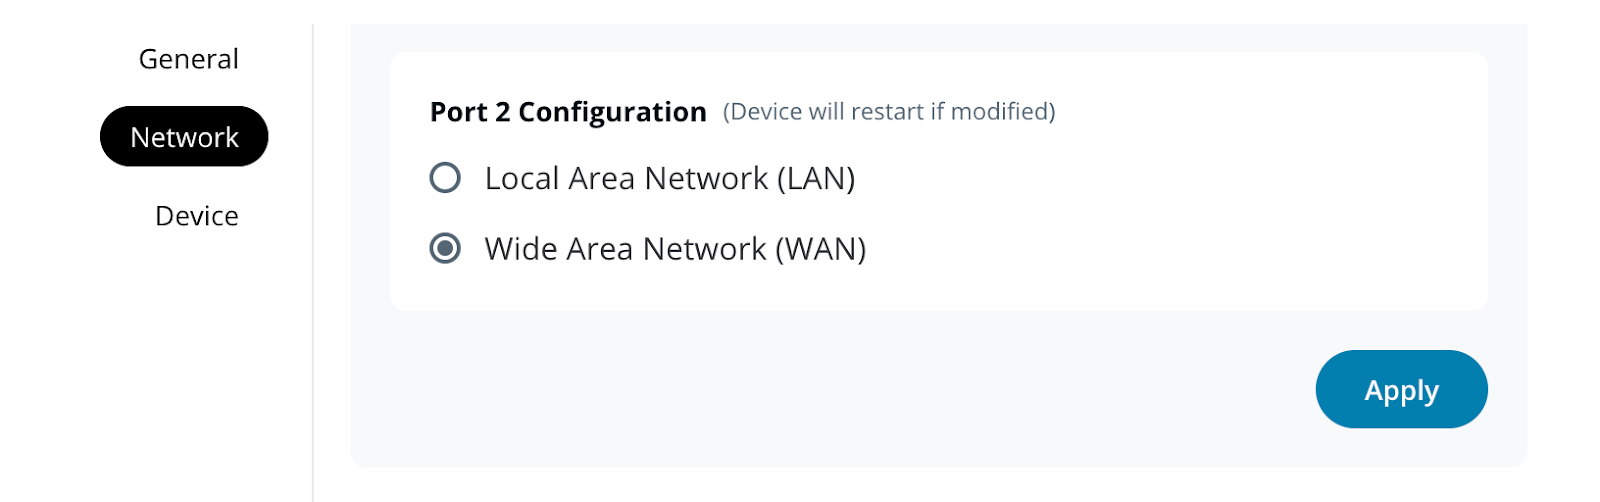 Enable WAN backup mode on the indoor cellular gateway